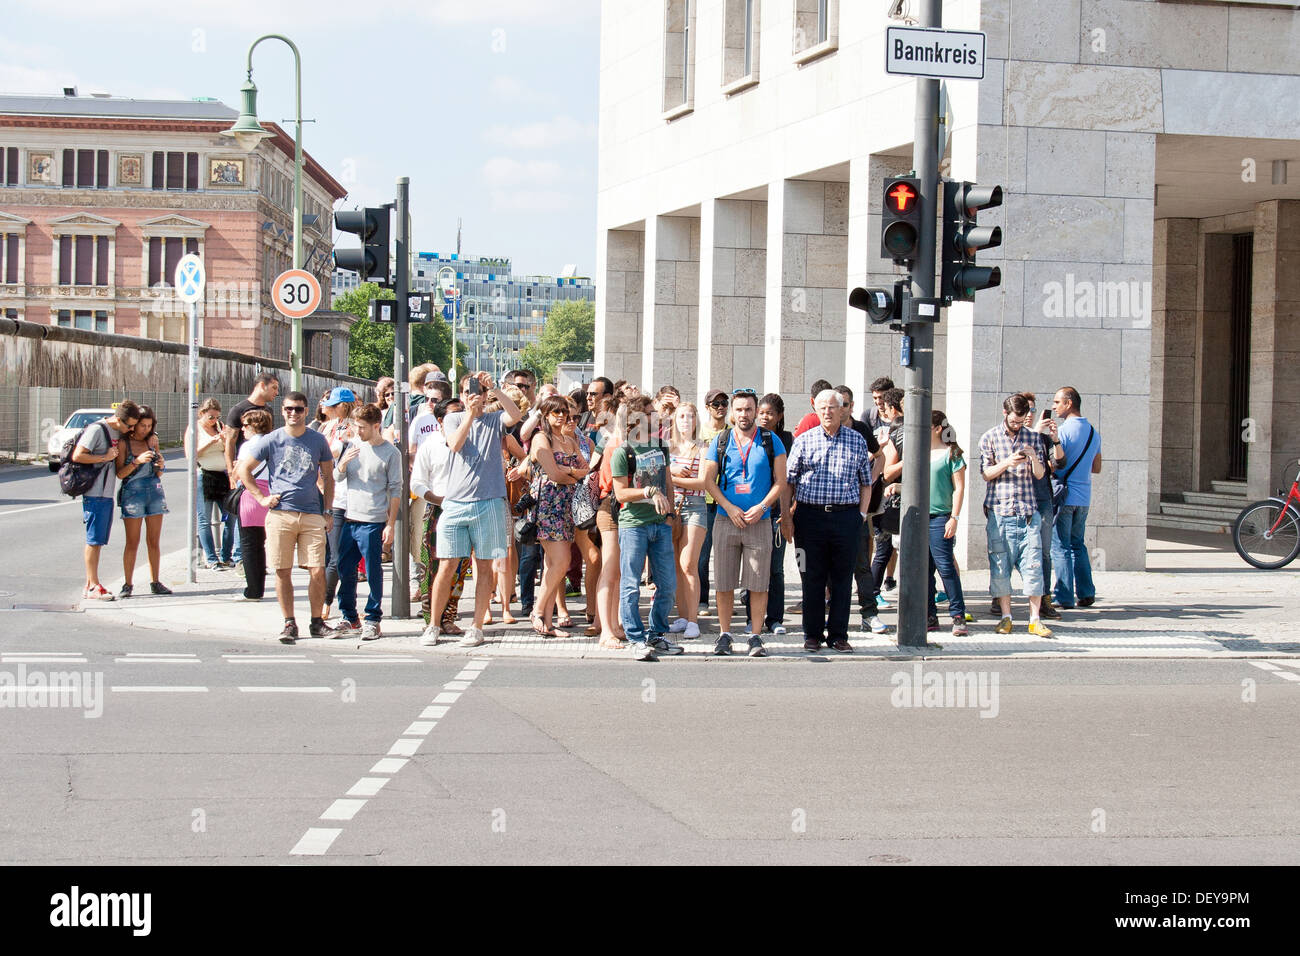 Pedestrians waiting at the traffic lights - Berlin, Germany Stock Photo